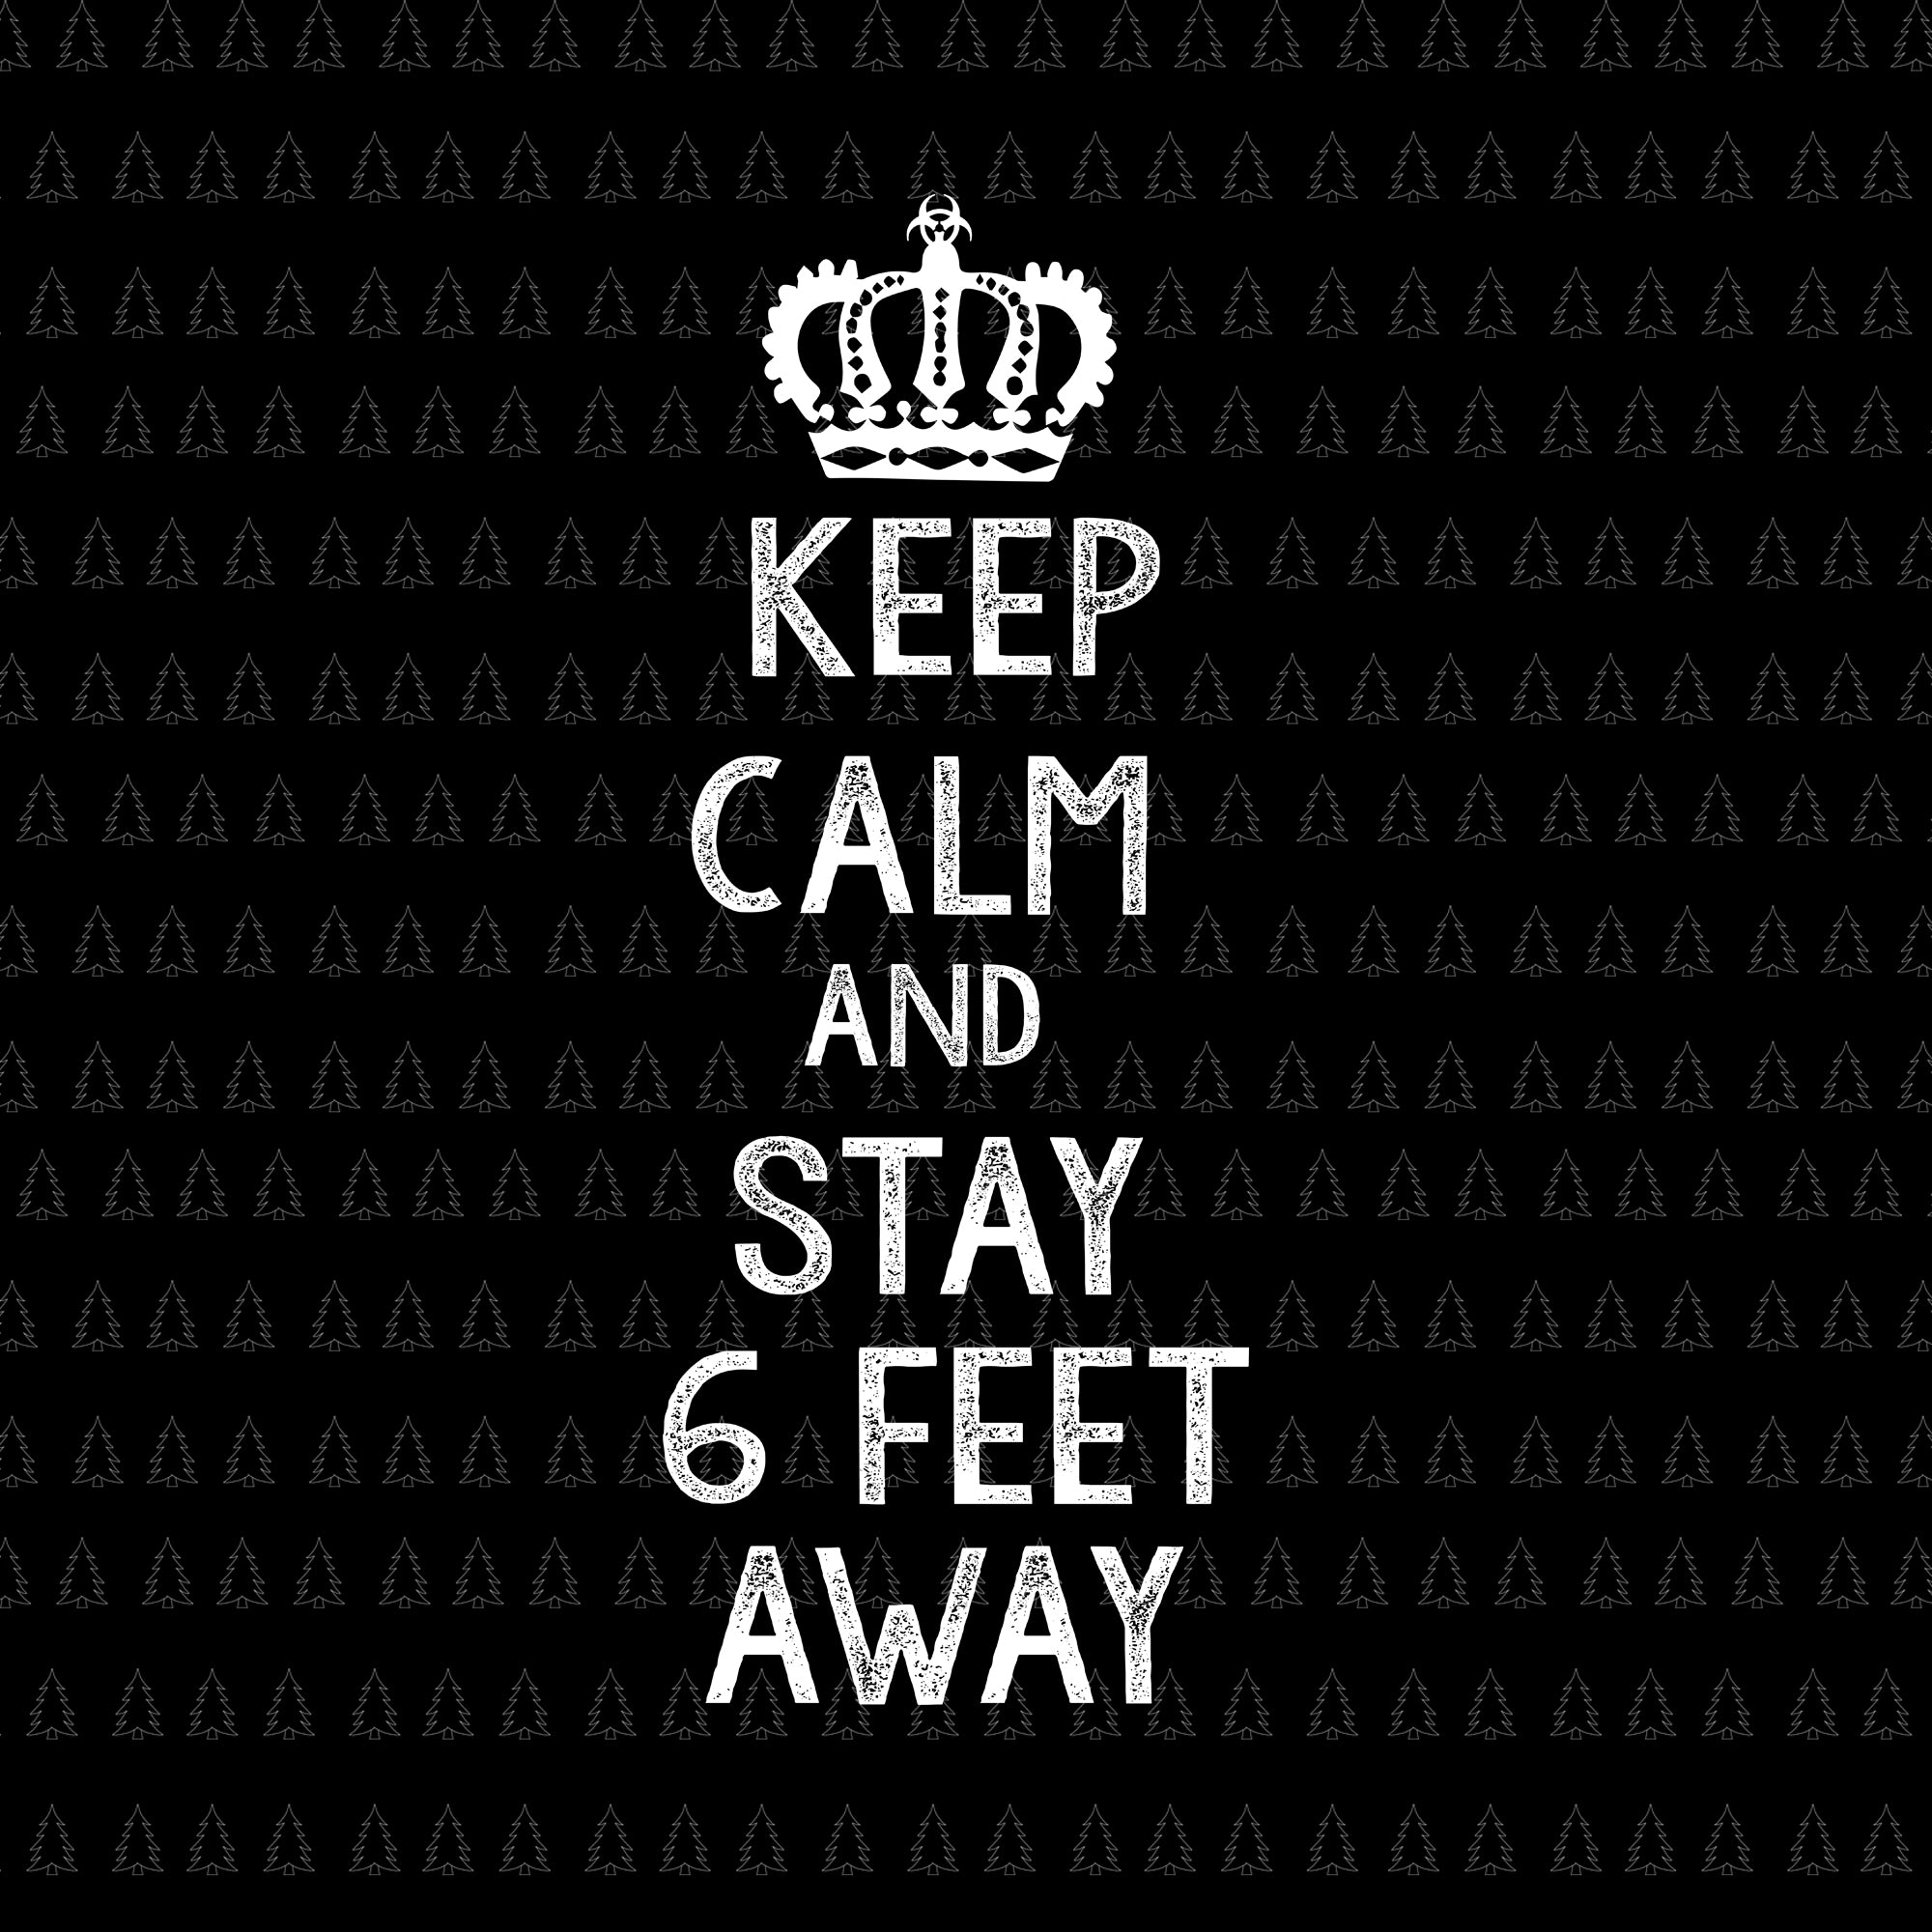 Keep calm and stay 6 feet away svg, keep calm and stay 6 feet away, keep calm and stay 6 feet away png, eps, dxf svg file